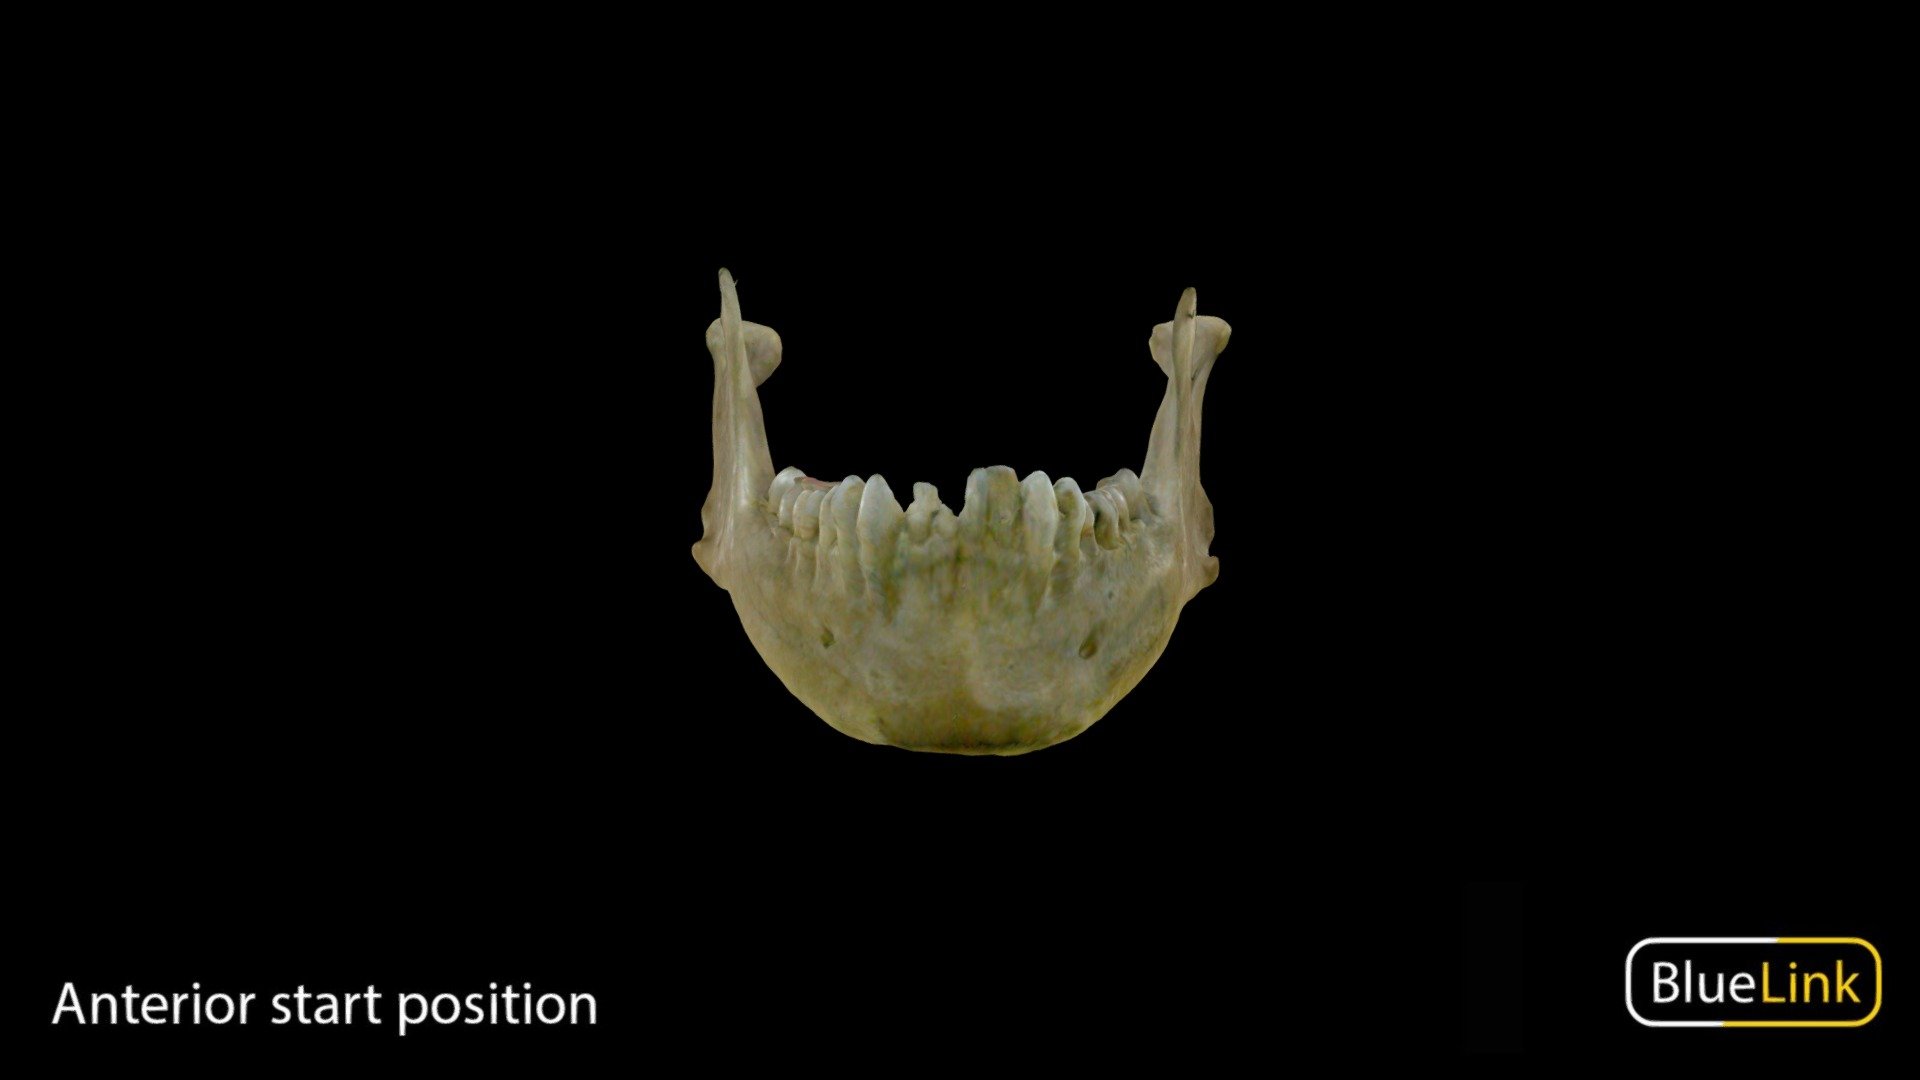 Human mandible

Captured with: Einscan Pro

Captured and edited by: Cristina Prall

University of Michigan

CC B. Kathleen Alsup and Glenn M. Fox - Mandible - 3D model by Bluelink Anatomy - University of Michigan (@bluelinkanatomy) 3d model